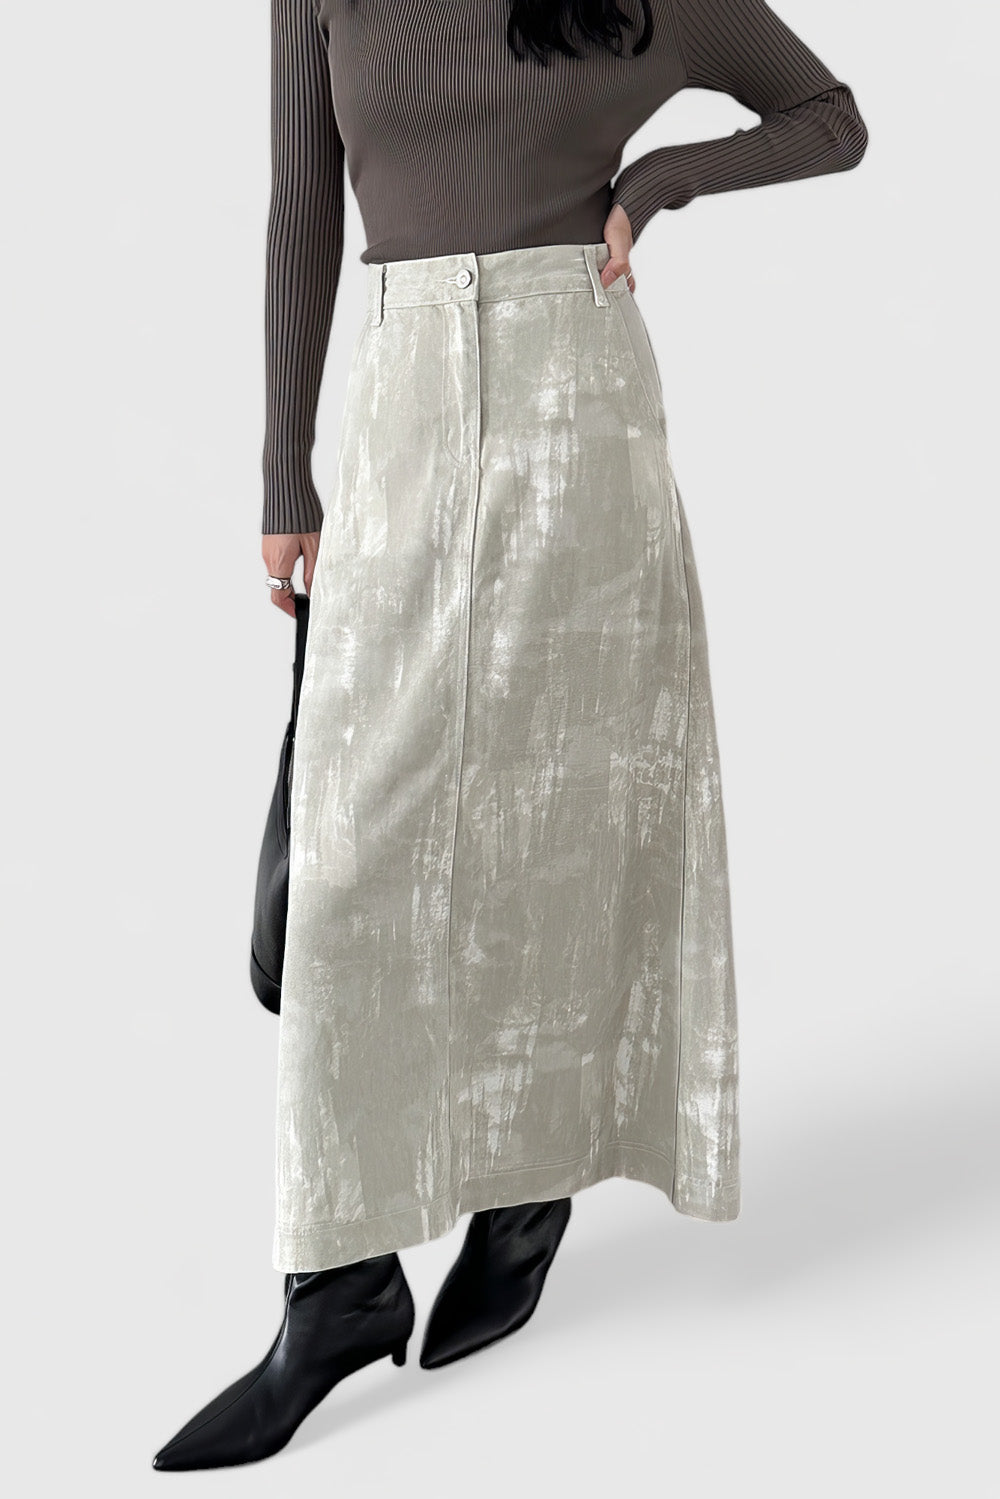 High Waisted Midi Skirt in Patterned Fabric - Grey